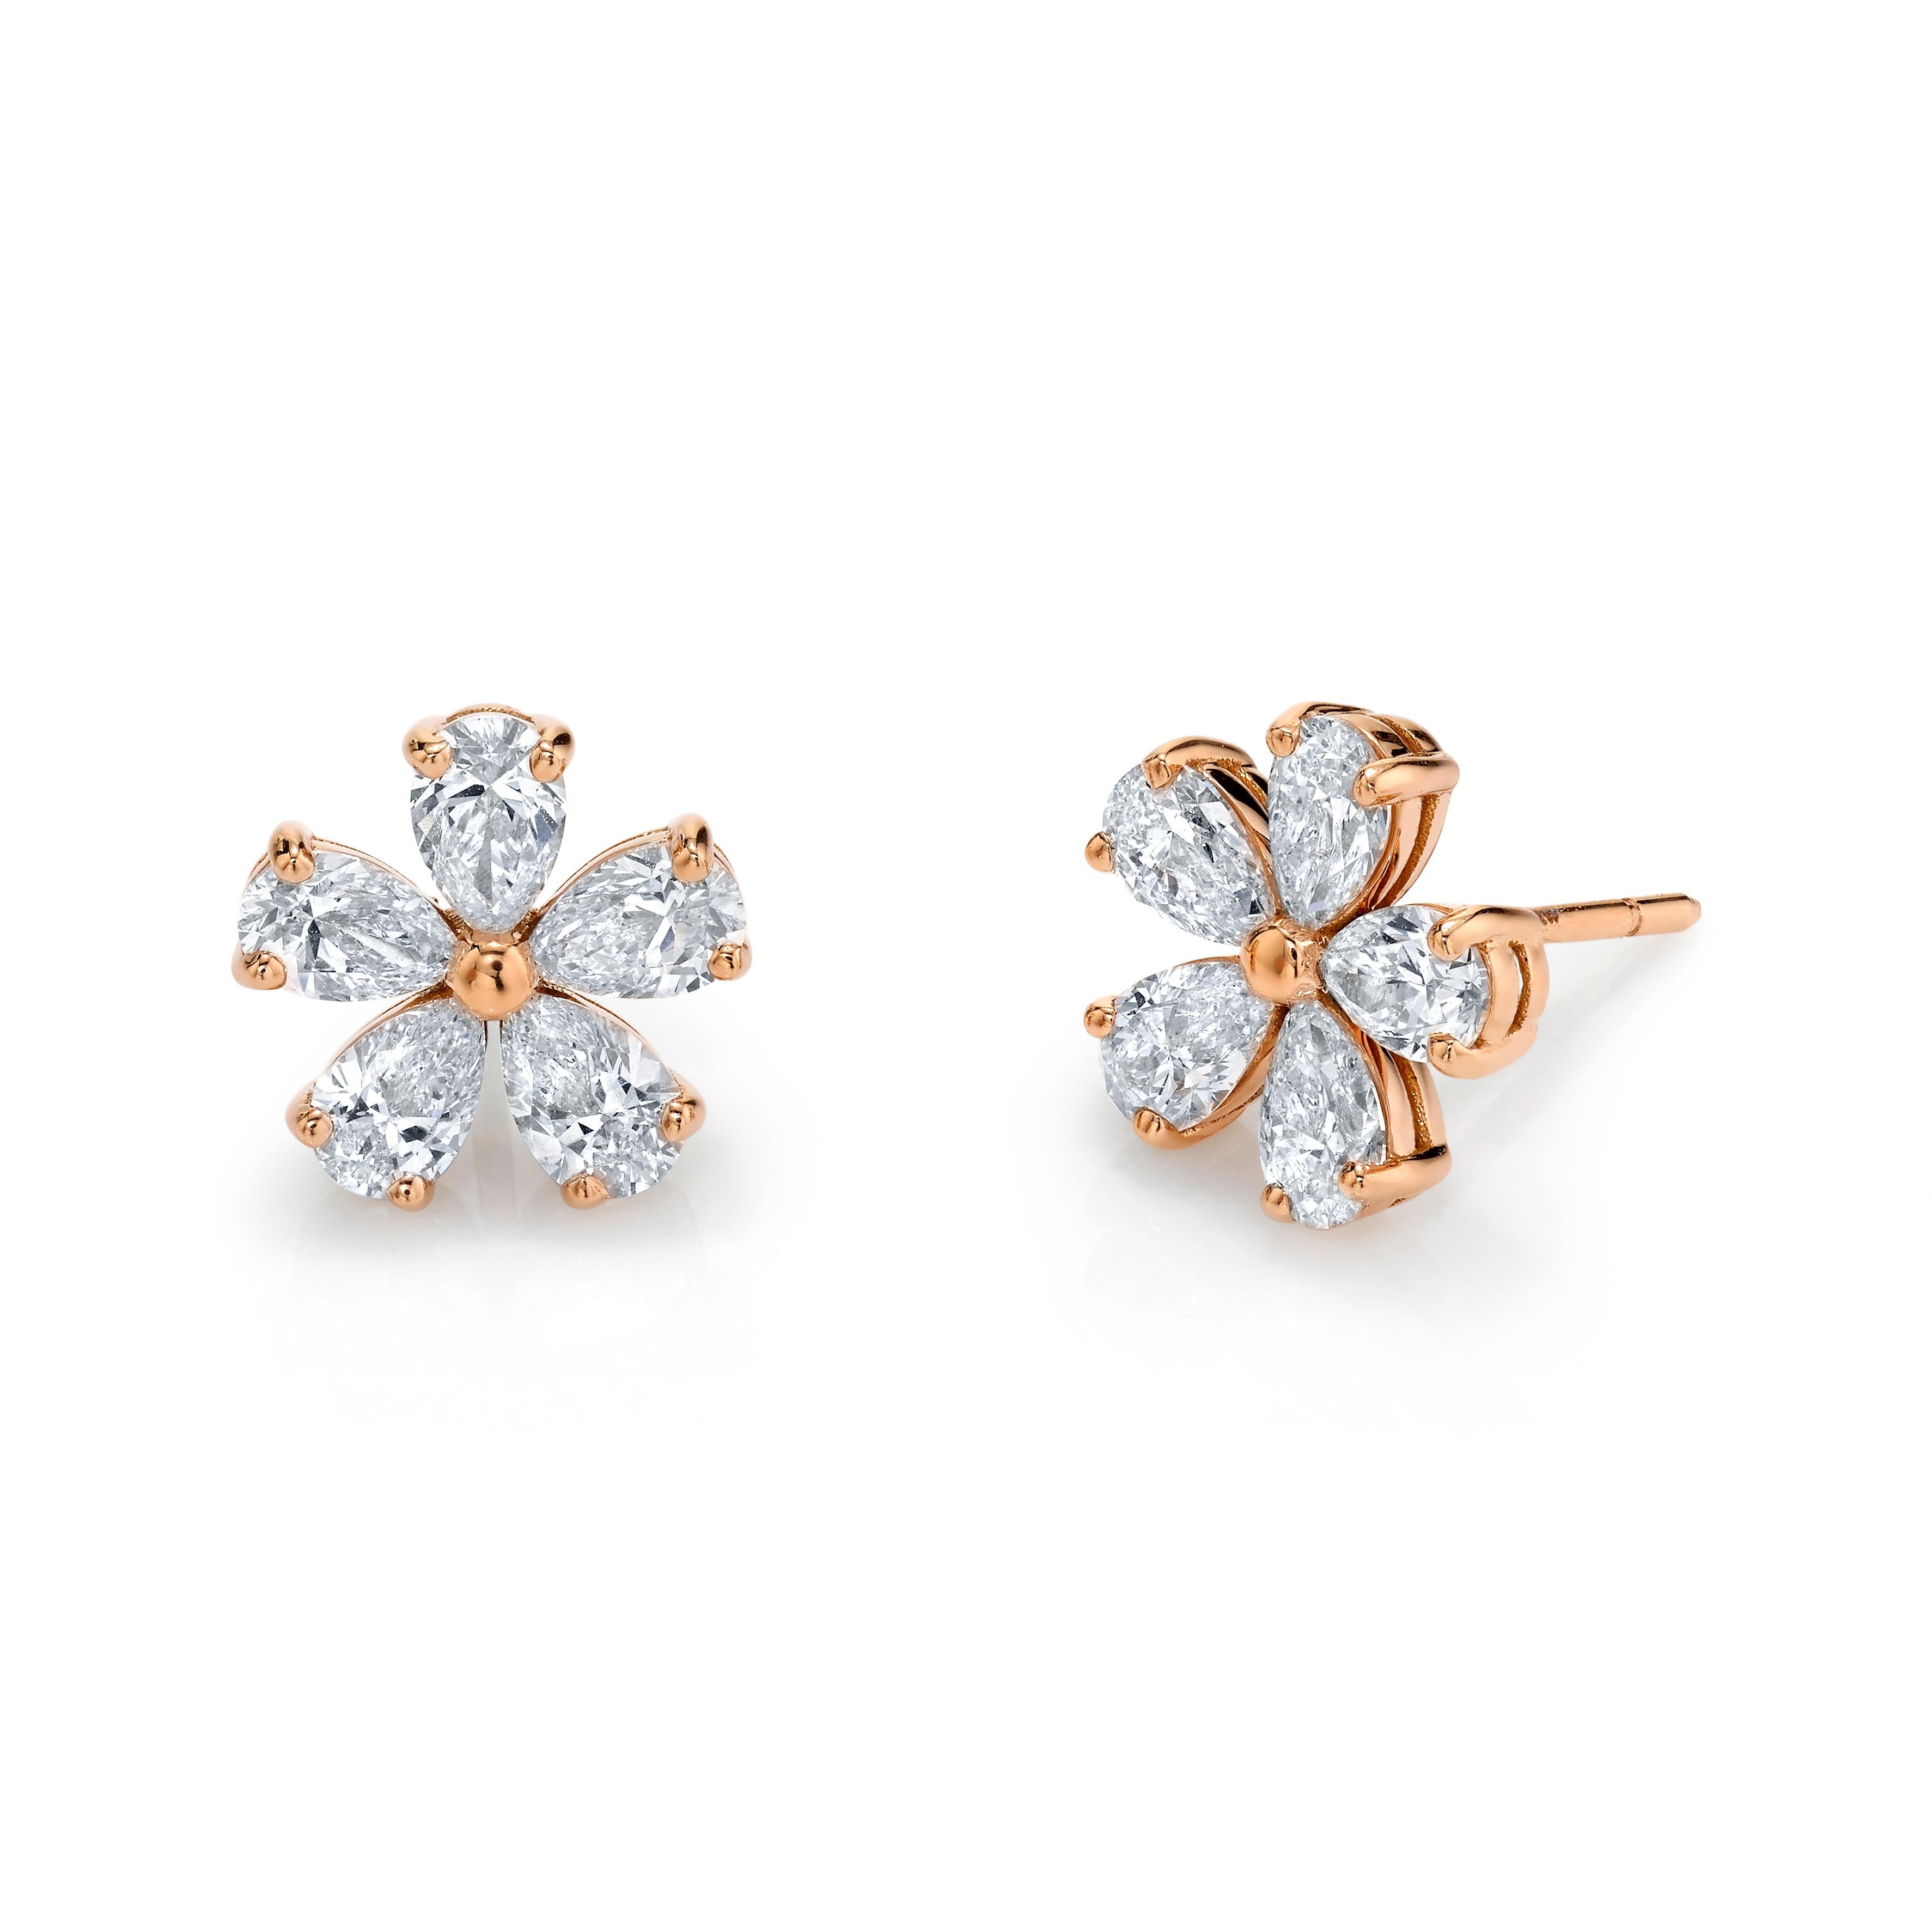 Pear Shape Diamonds set in 18k yellow gold to create a stunning pair of flower earrings.
1.88 carats total weight  
Color G-H  Clarity VS-SI

Also available in 18k rose gold and white gold.